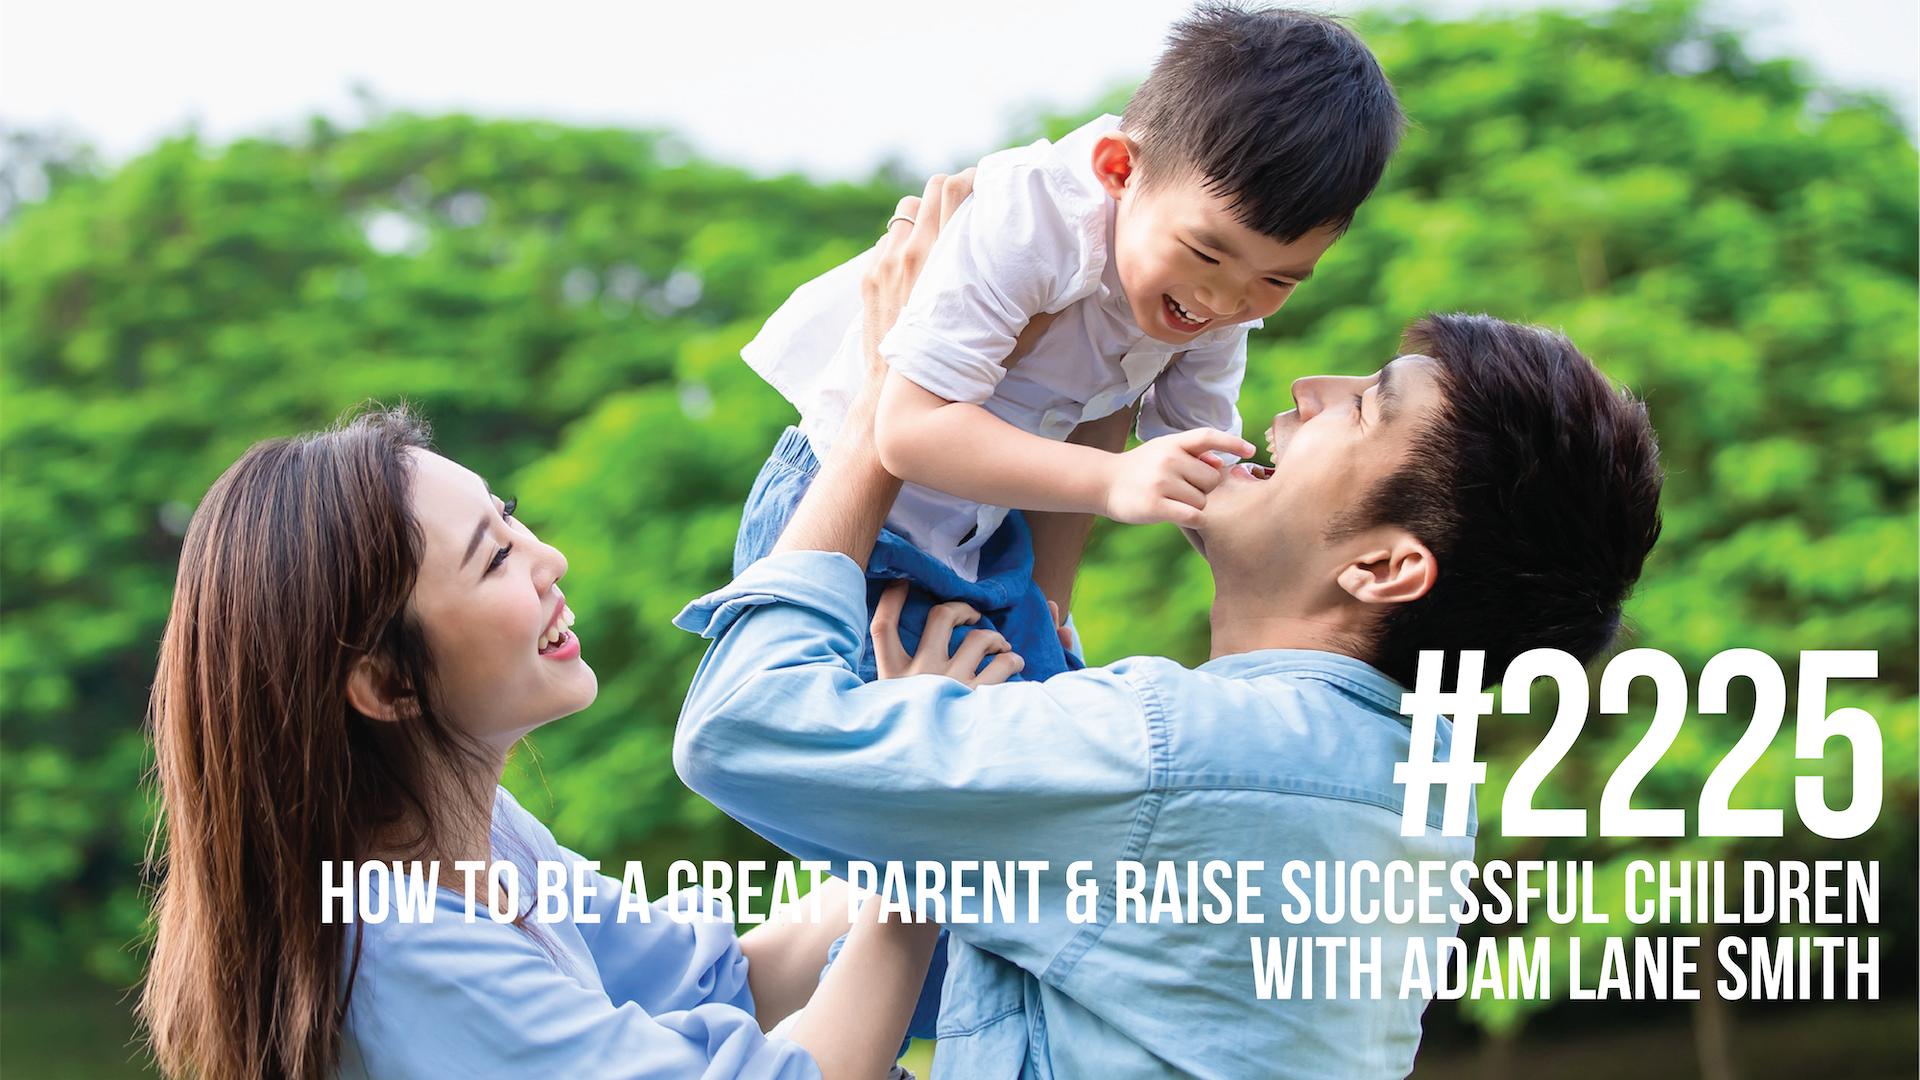 2225: How to be a Great Parent & Raise Successful Children With Adam Lane Smith